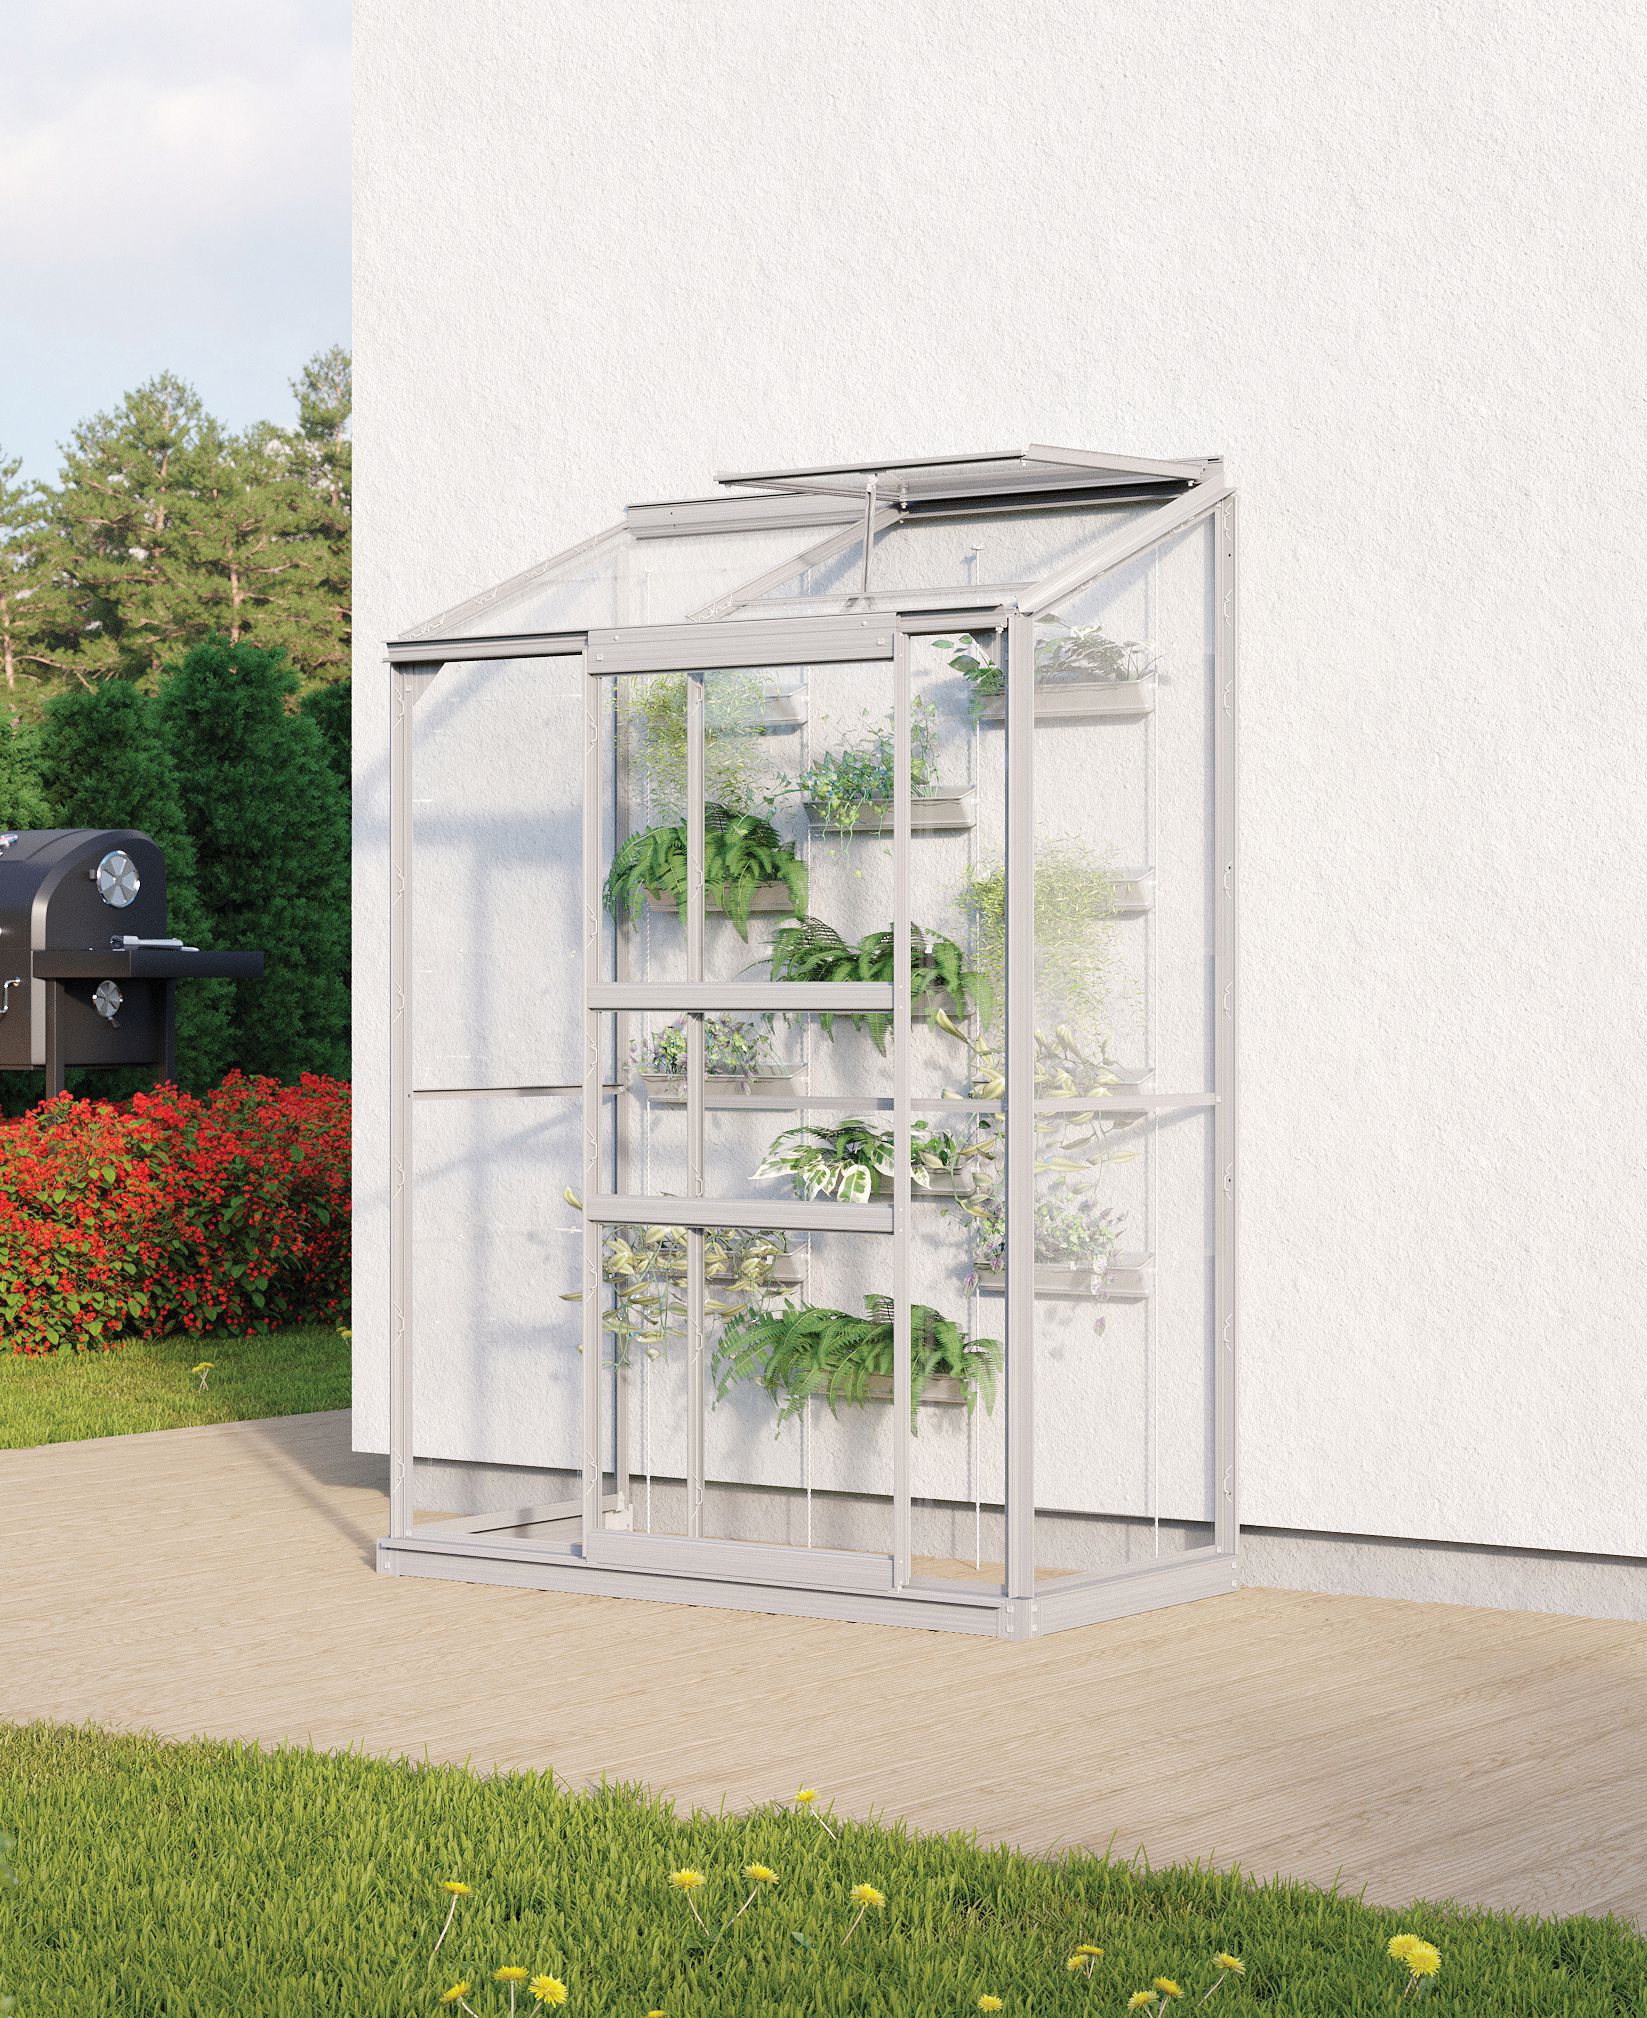 Image of Vitavia Ida 2 x 4ft Horticultural Glass Greenhouse with Steel Base